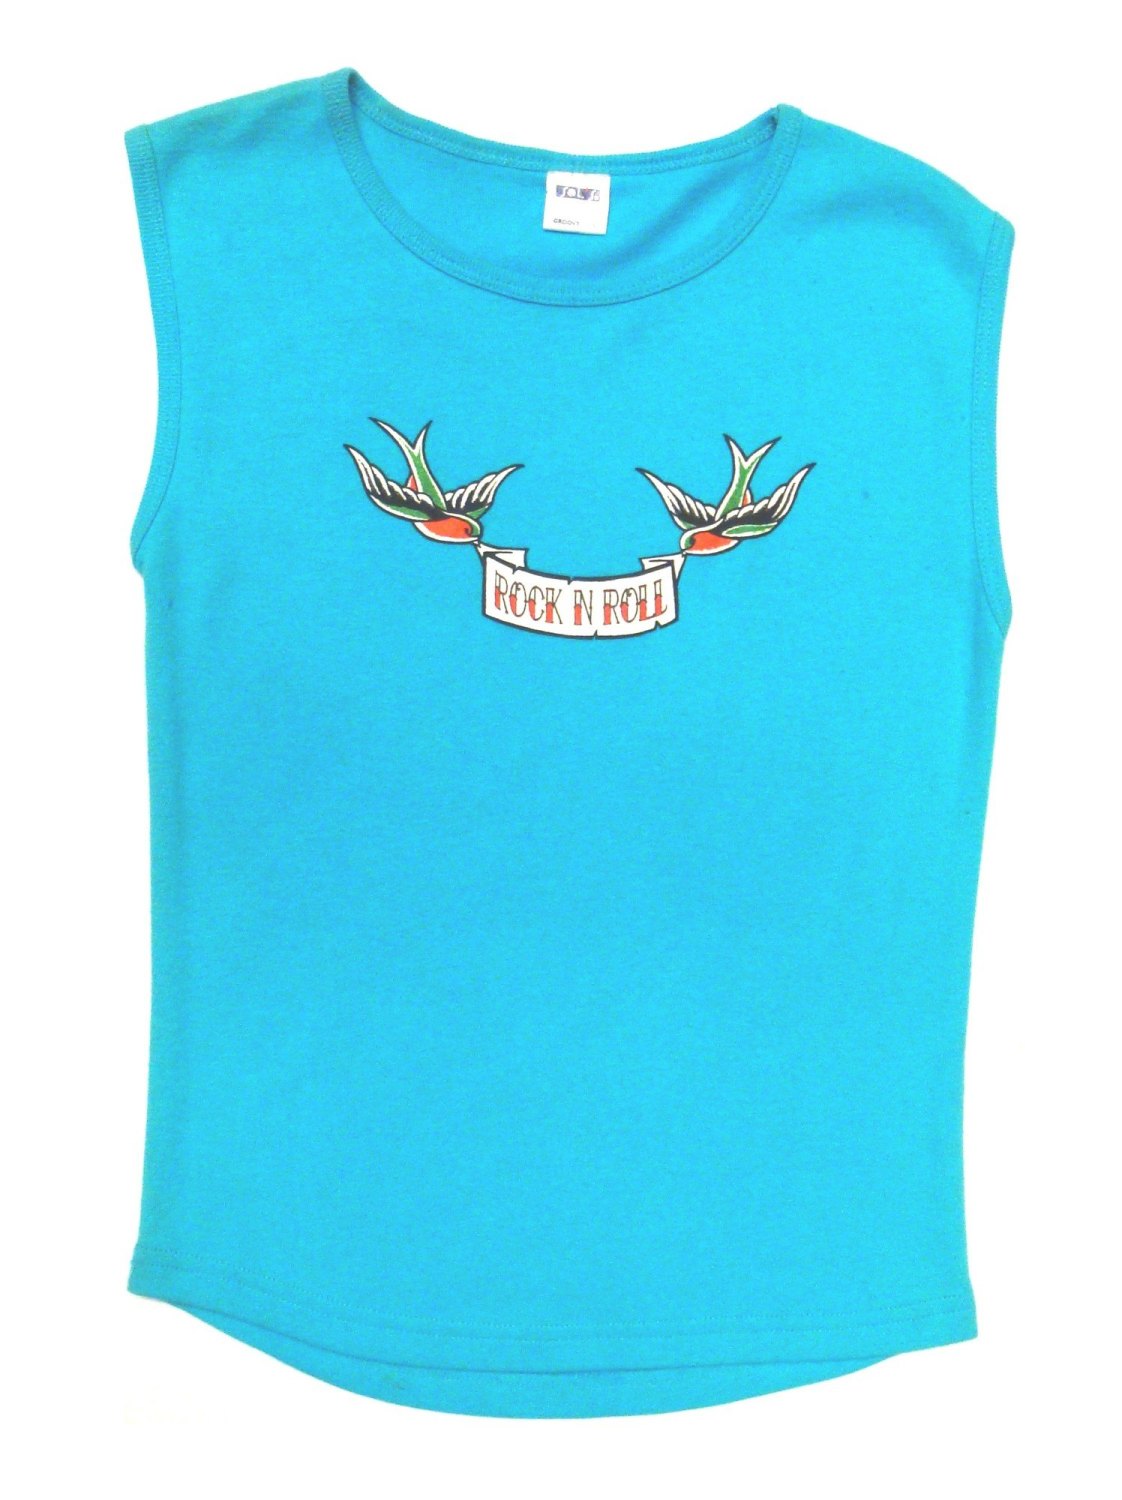 Rock N Roll Suicide Rock N Roll Swallows Turquoise Sleeveless Top Small